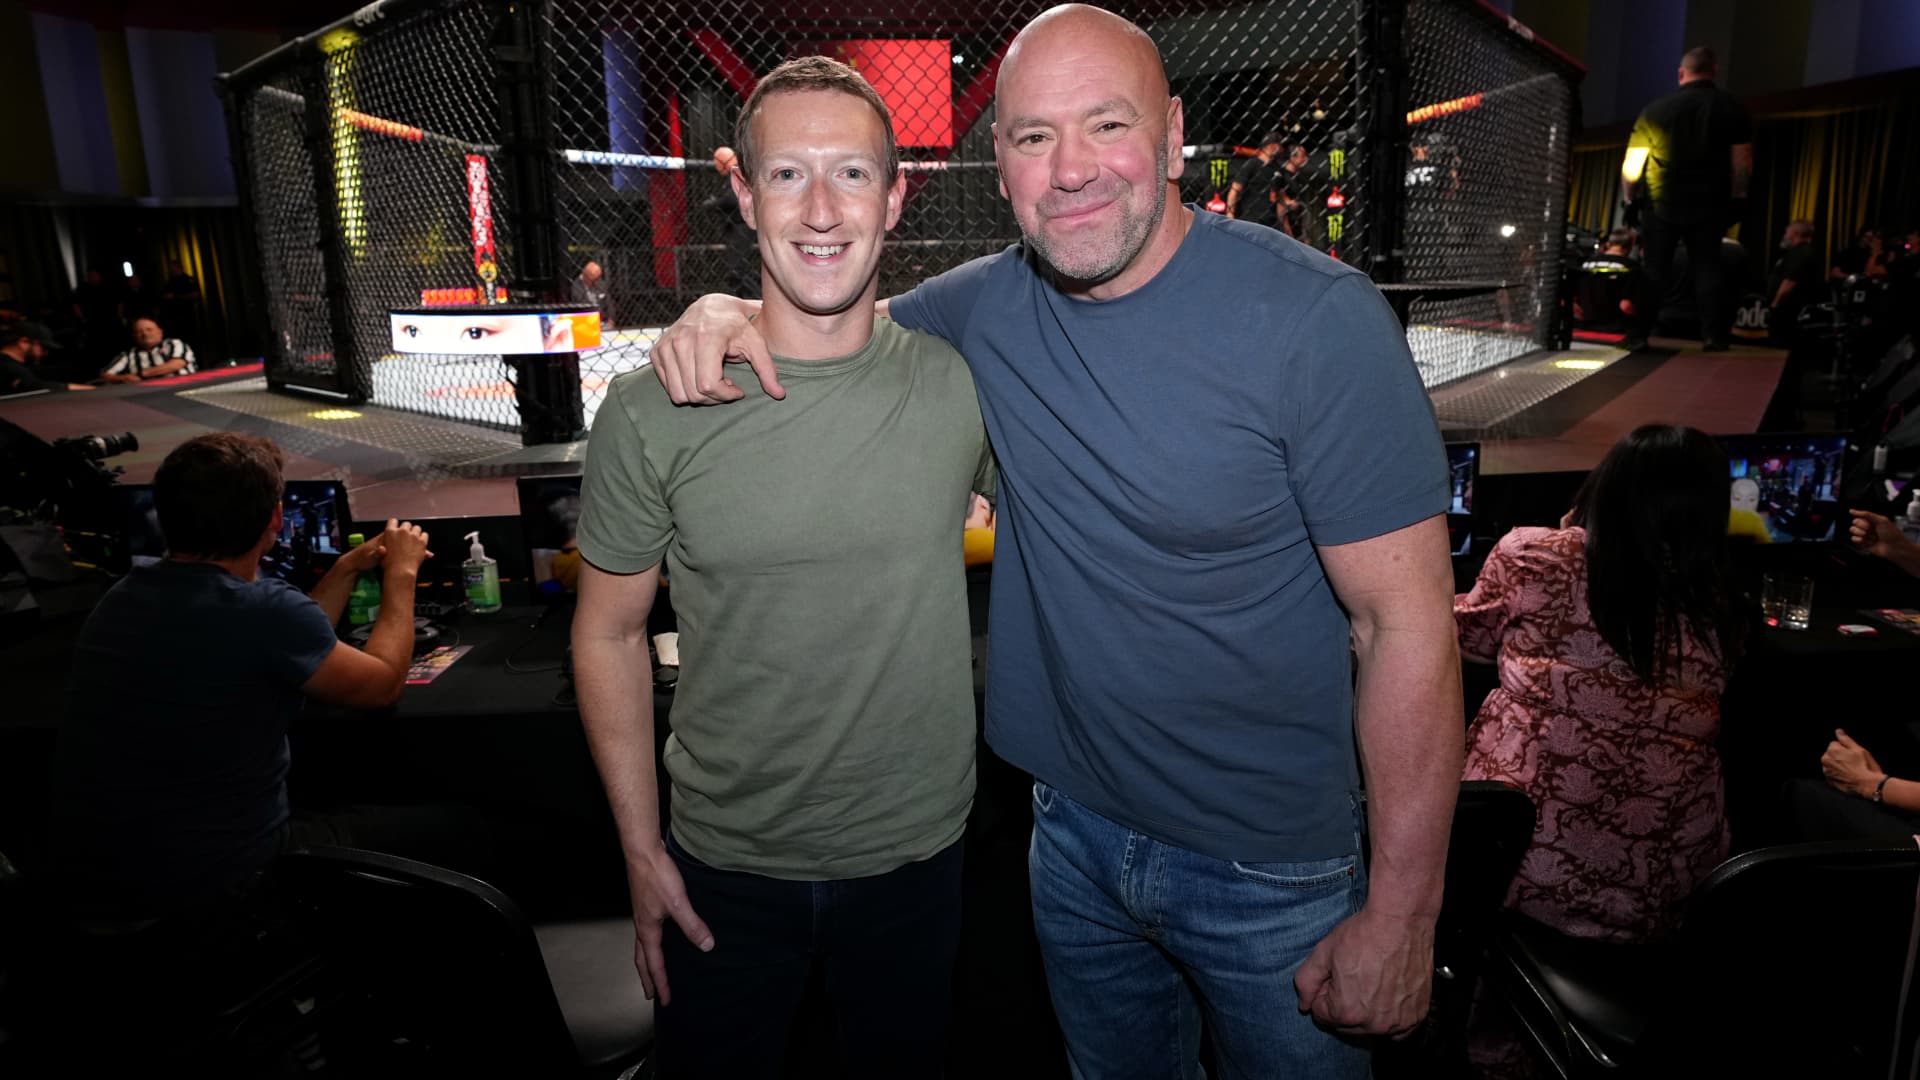 Meta CEO Mark Zuckerberg tore his ACL while training for a competitive MMA fight